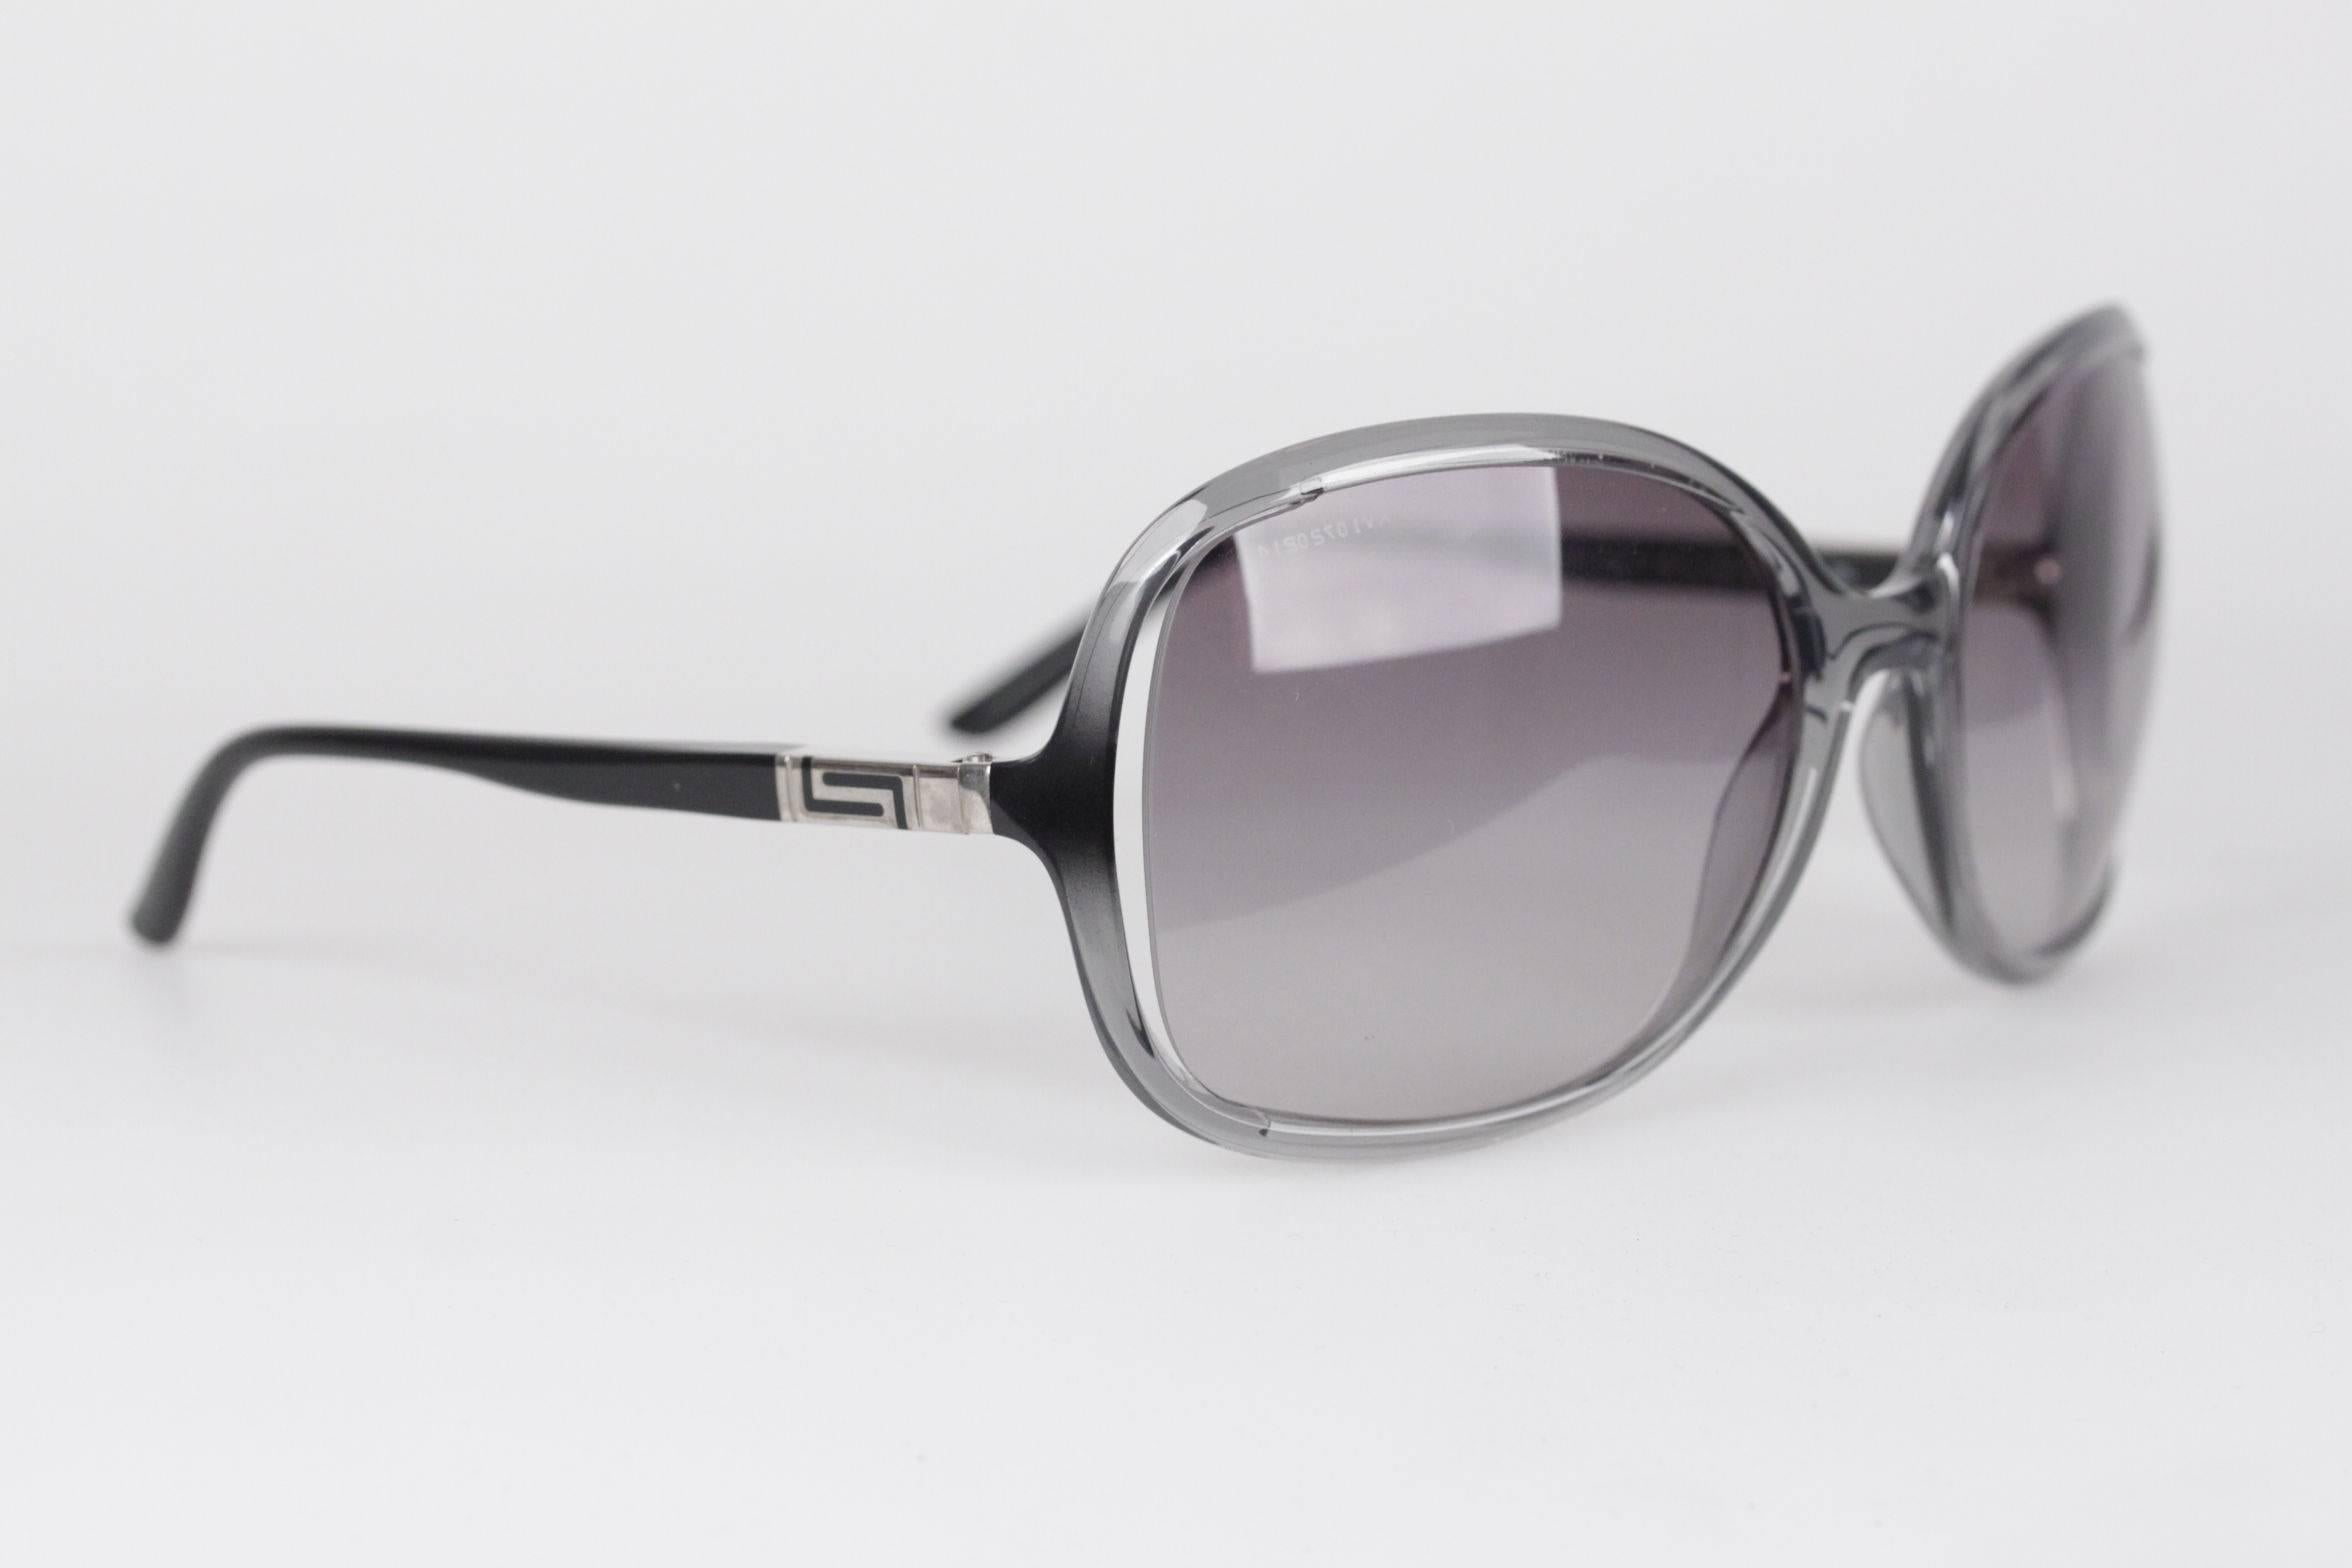 - VERSACE oversized sunglasses

- mod: 4174 236/11 61/19 125 2N

- Gray frame, with light gray MINT GRADIENT lens - black arms

Condition: A+ :MINT CONDITION! Mint item. Never worn or used

Approx. measurements:

- TEMPLE LENGTH: 125